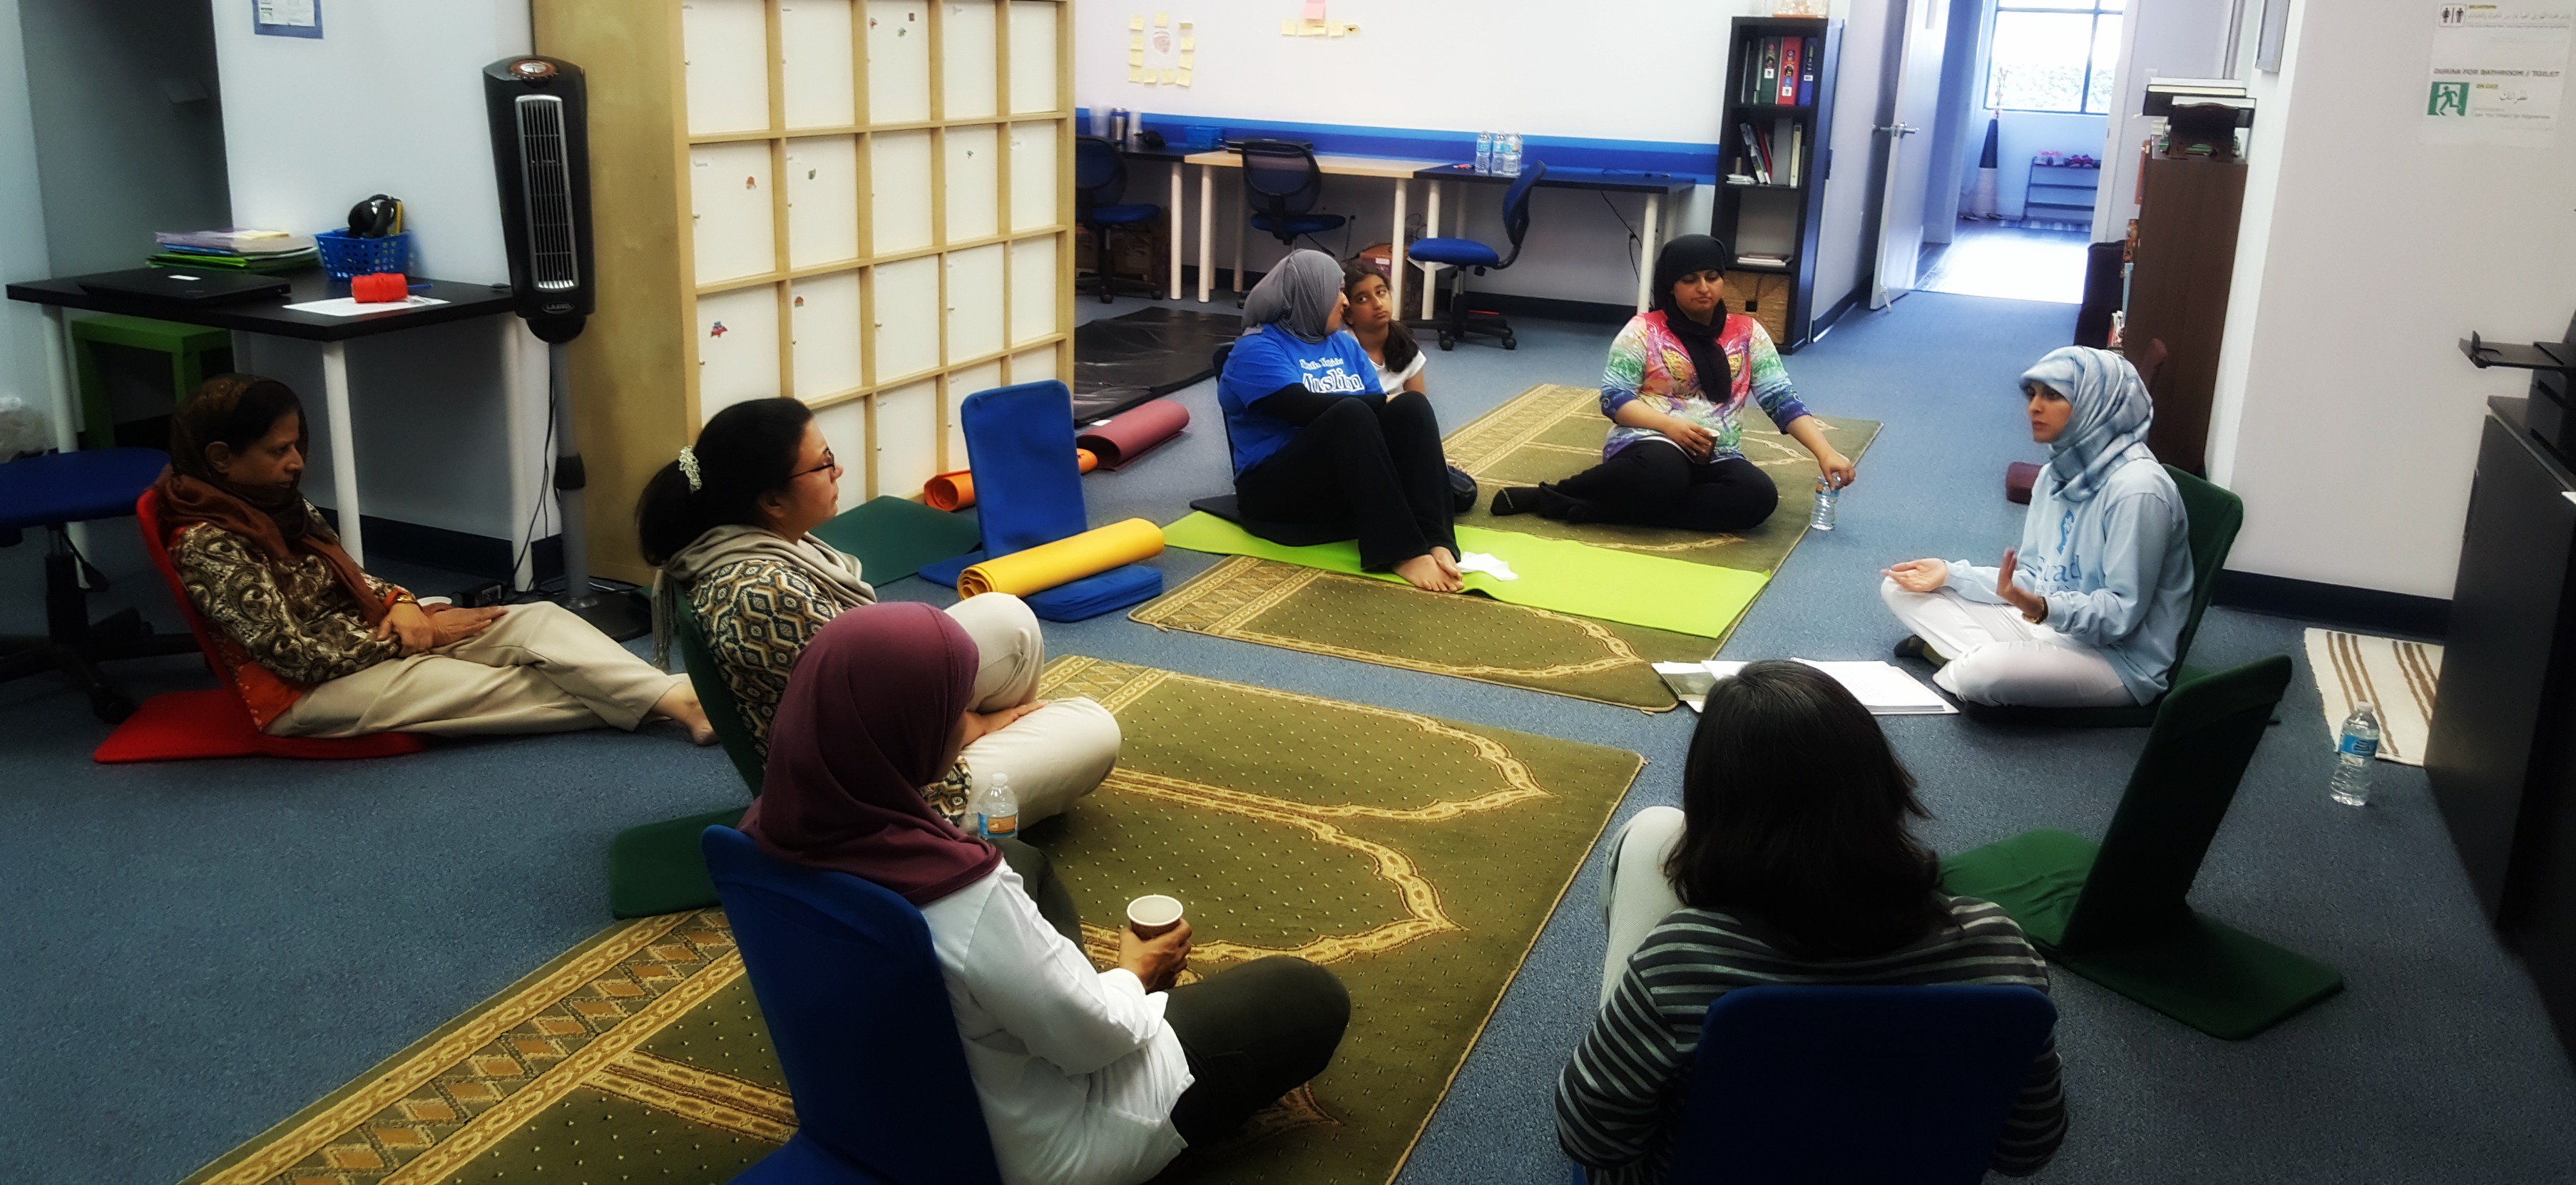 Sisters in the Sanad Body/Soul: Yoga & Dhikr Club relax after Yoga...sharing tea, naseeha and remembrance of Allah.